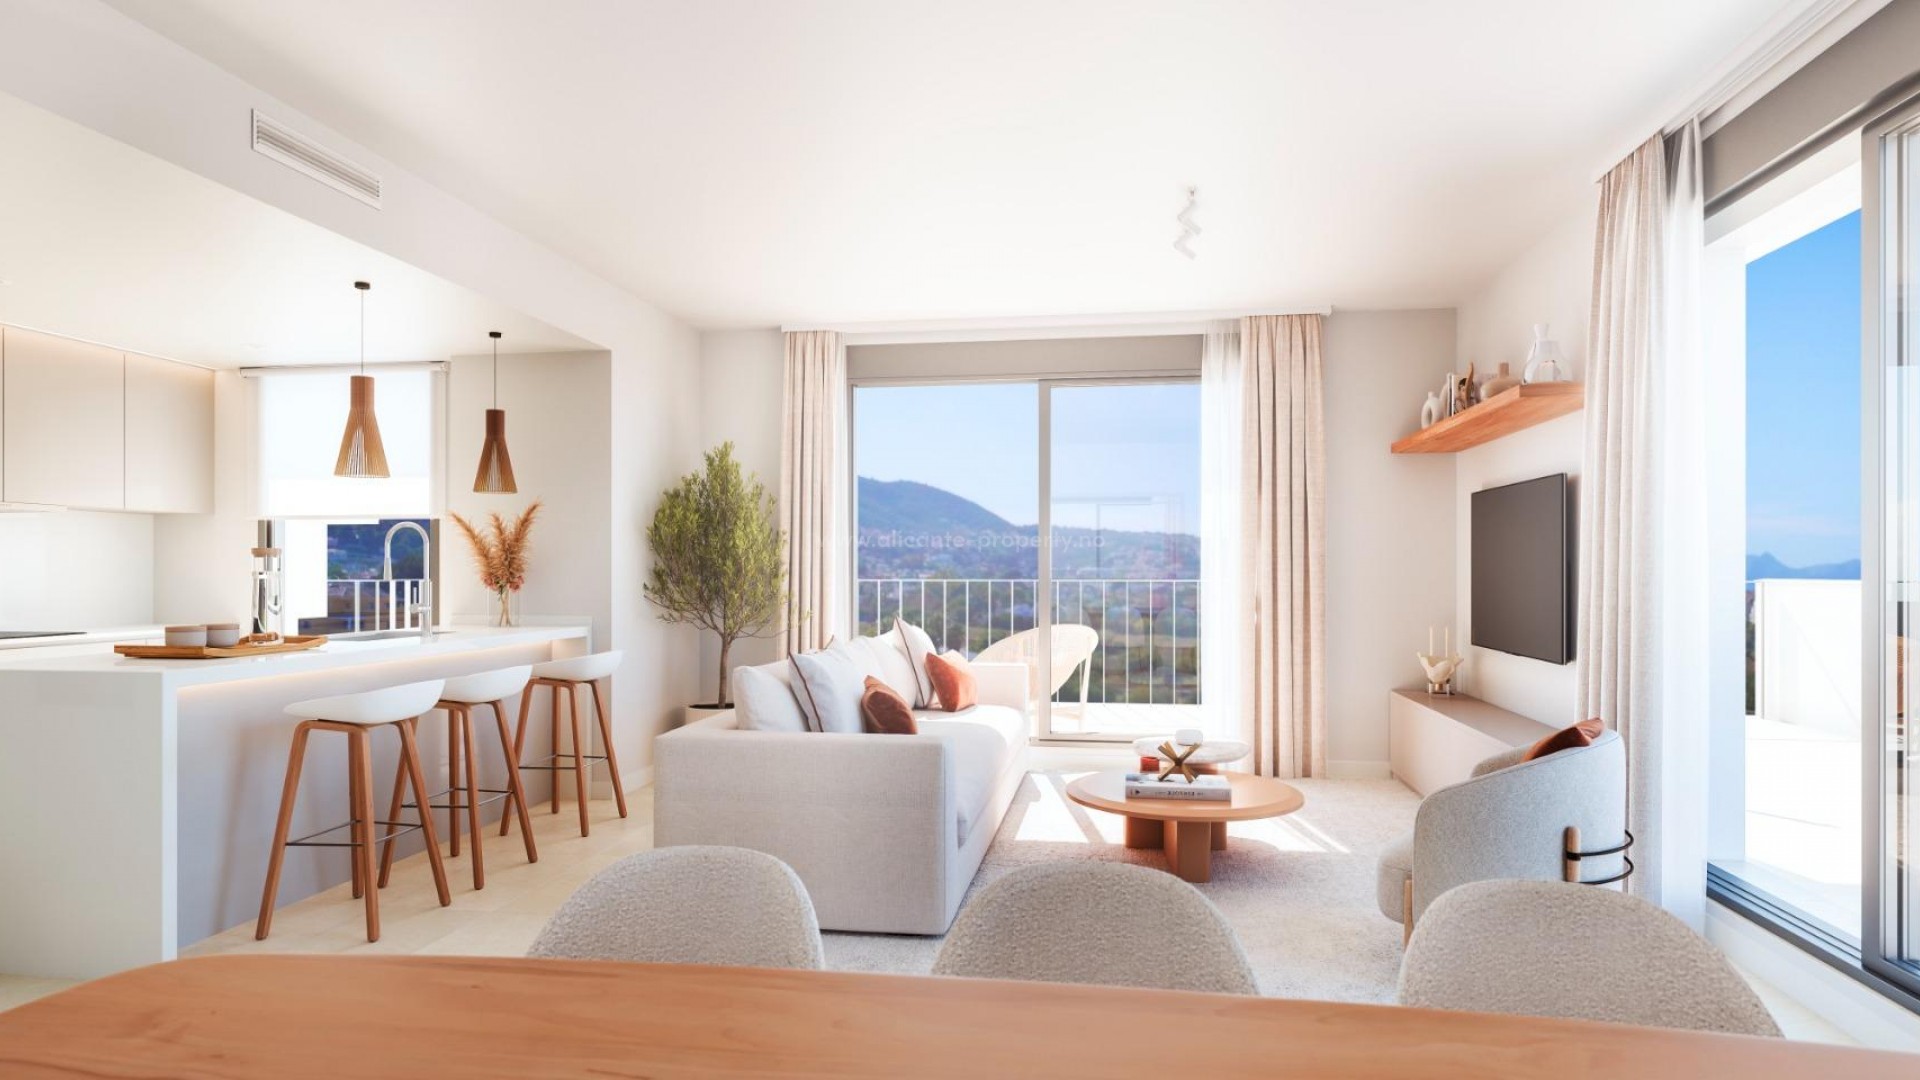 Exclusive new apartments and penthouses in Denia, 2/3/4 bedrooms, 2 bathrooms, all with terraces. Communal swimming pool and gym. Steps from the sea.